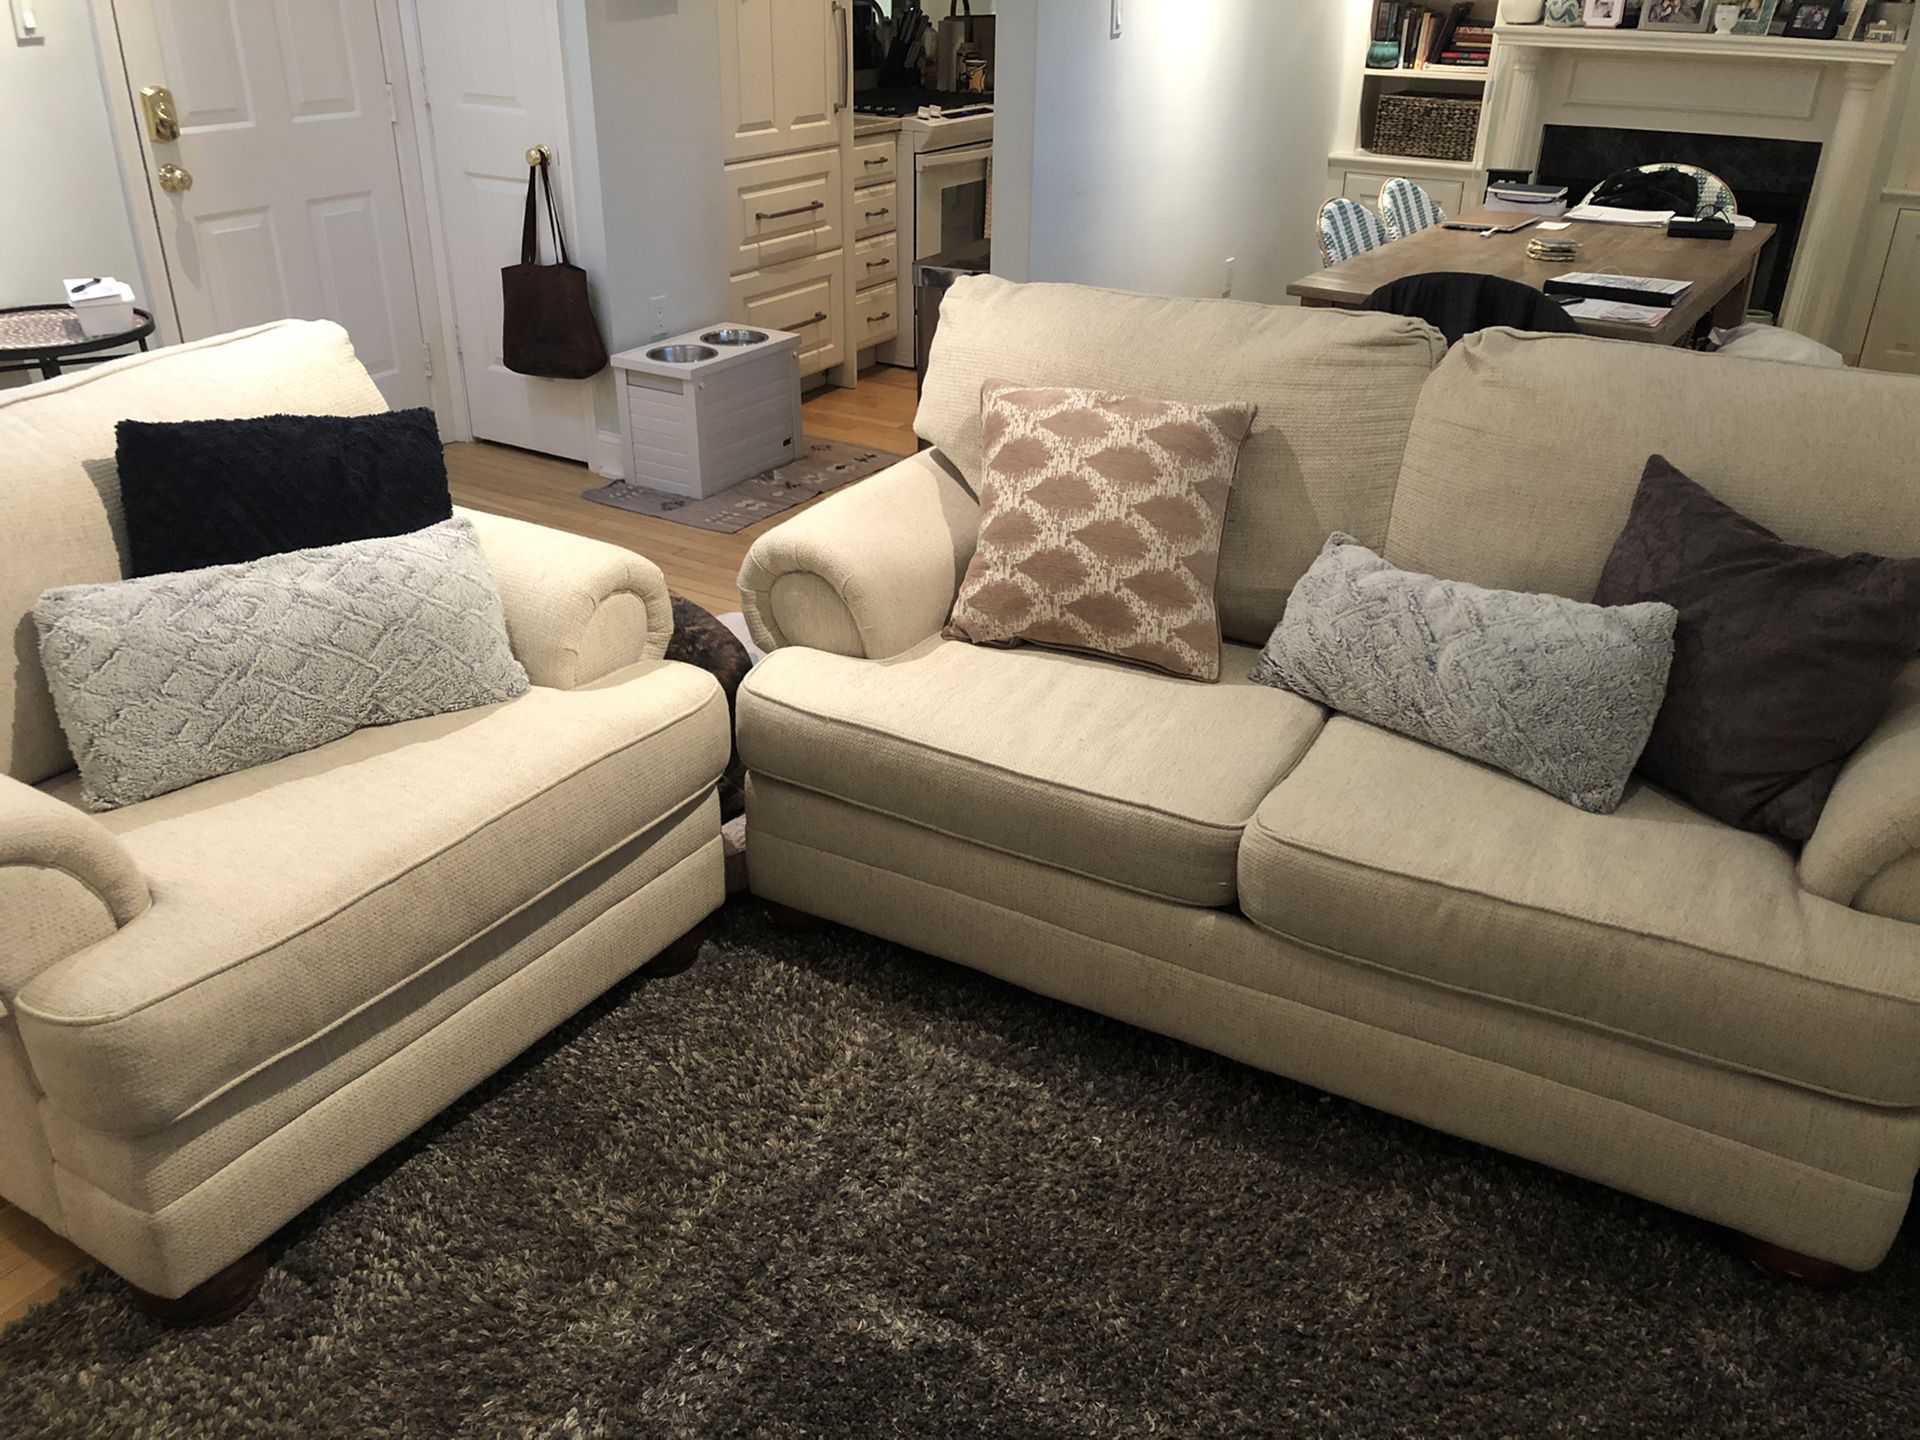 Living Spaces “Danielle” Beige Couch and Armchair